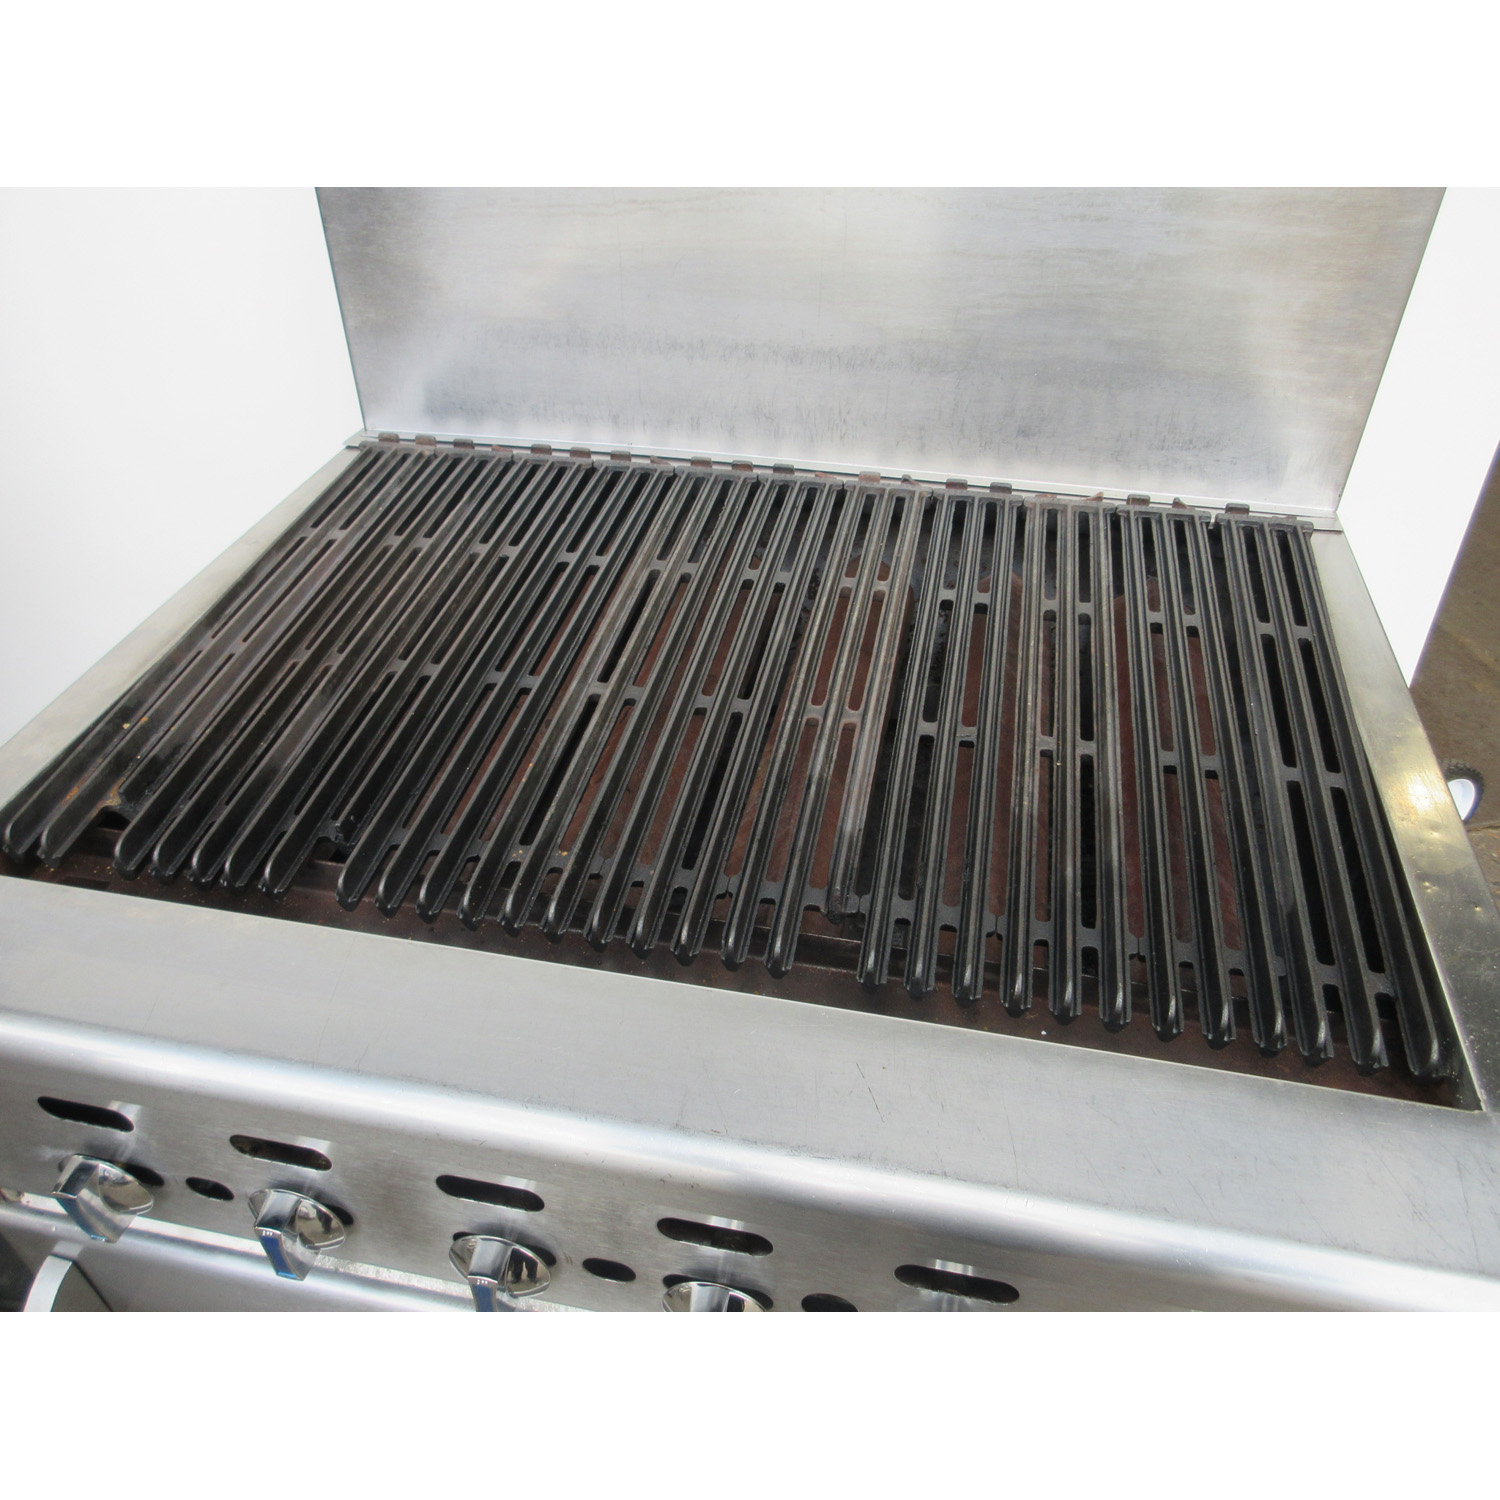 Imperial IR-36BR-C Radiant Broiler Range with Convection Oven Gas, Excellent Condition image 2